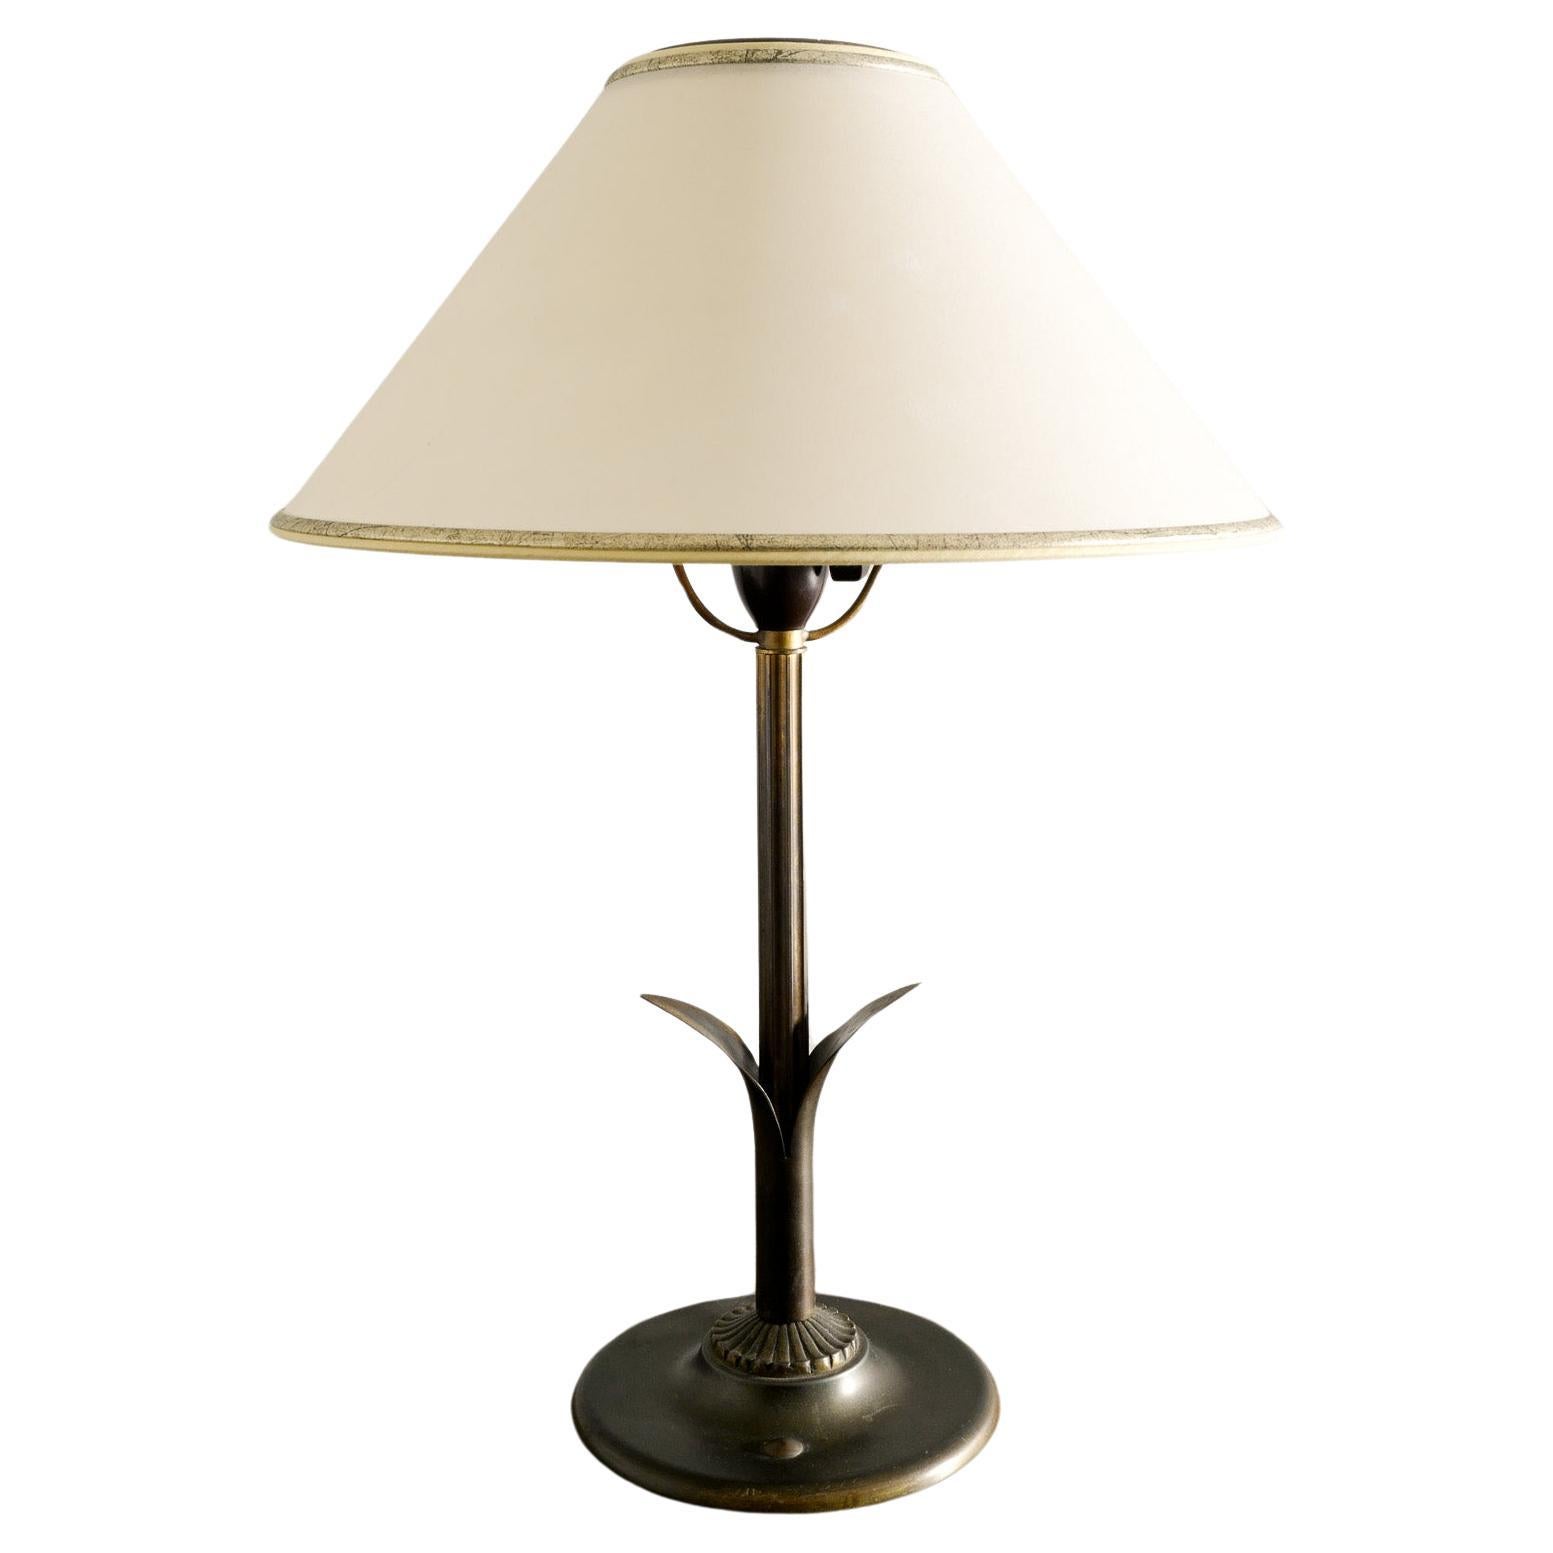 Danish Decorative Art Déco Table Lamp in Bronze with Original Shade, 1930s  For Sale